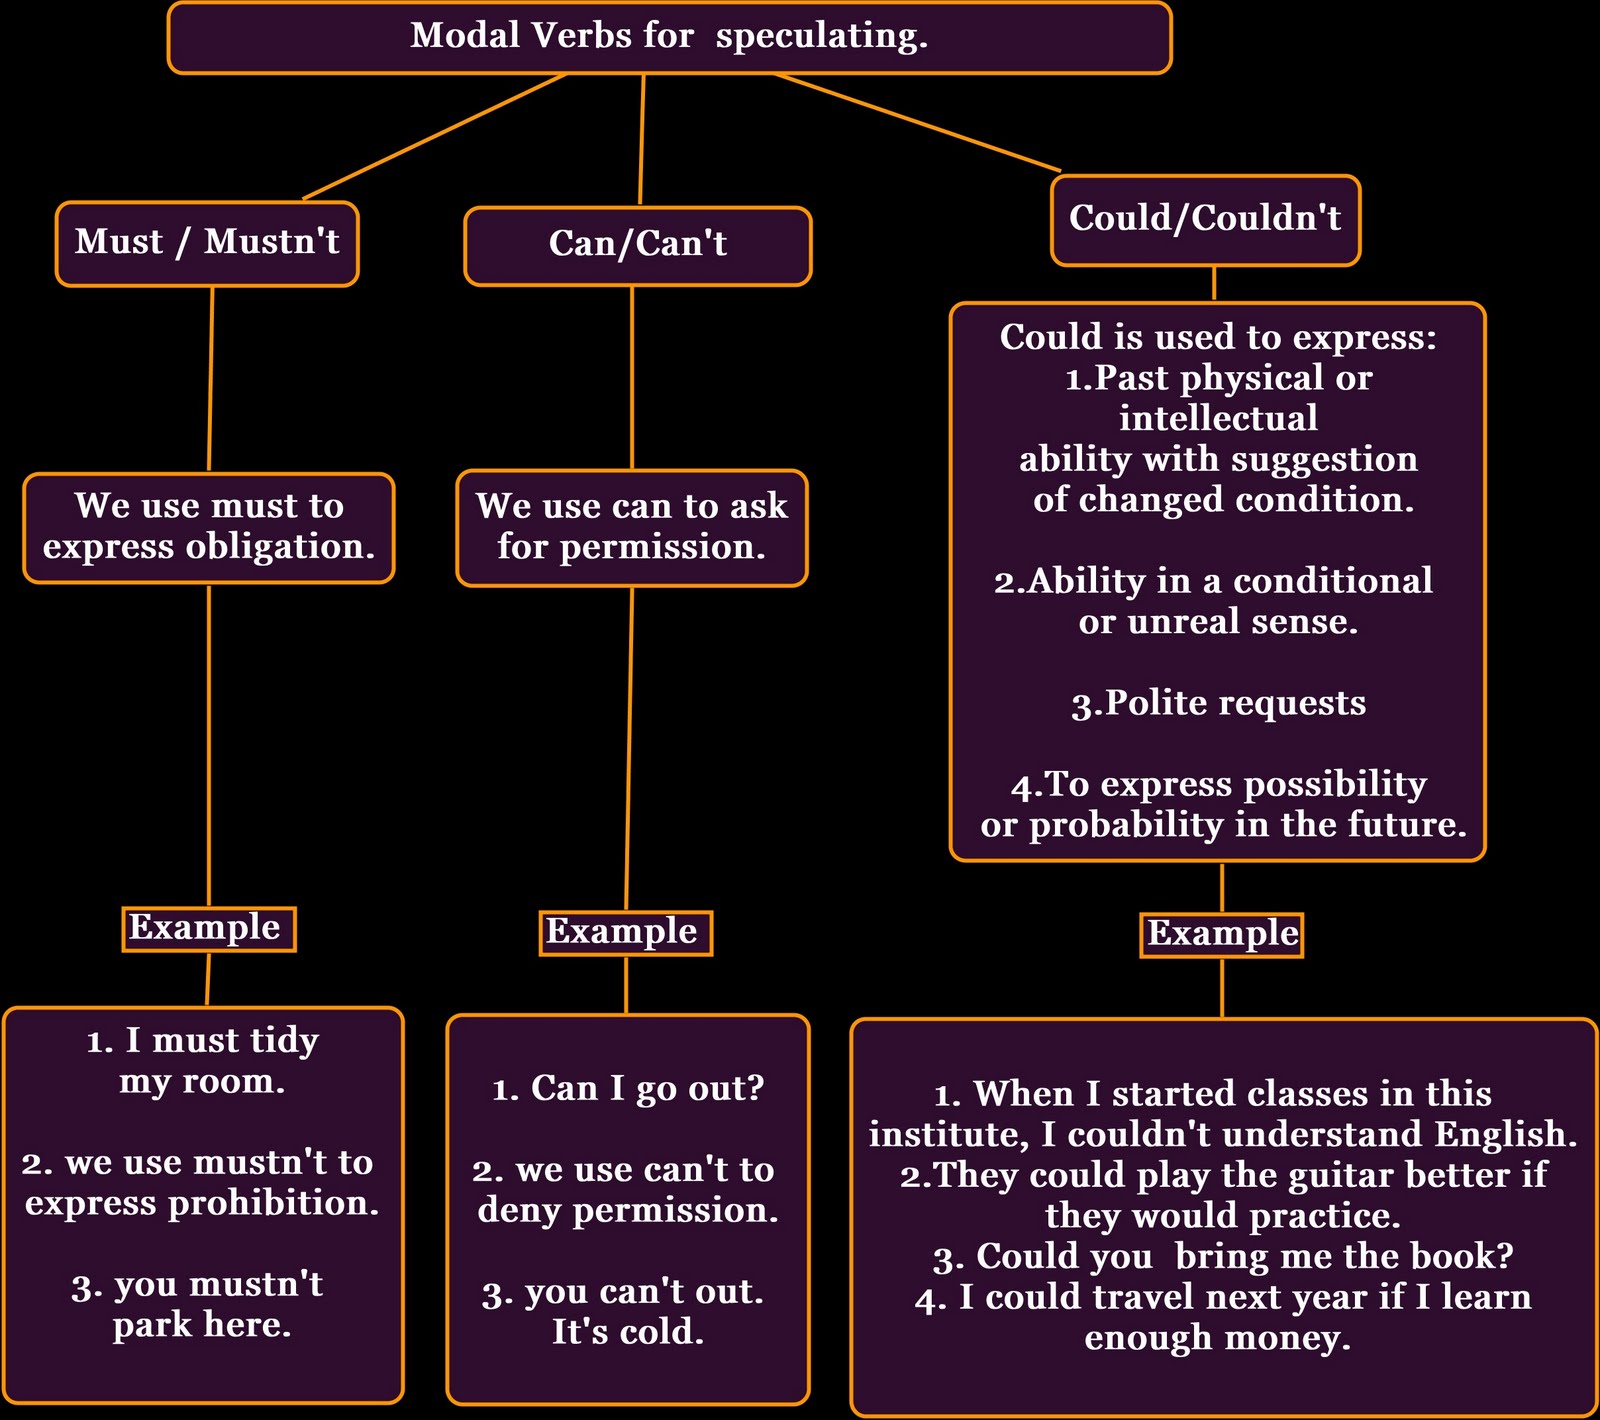 My English Pages Online MODAL VERBS